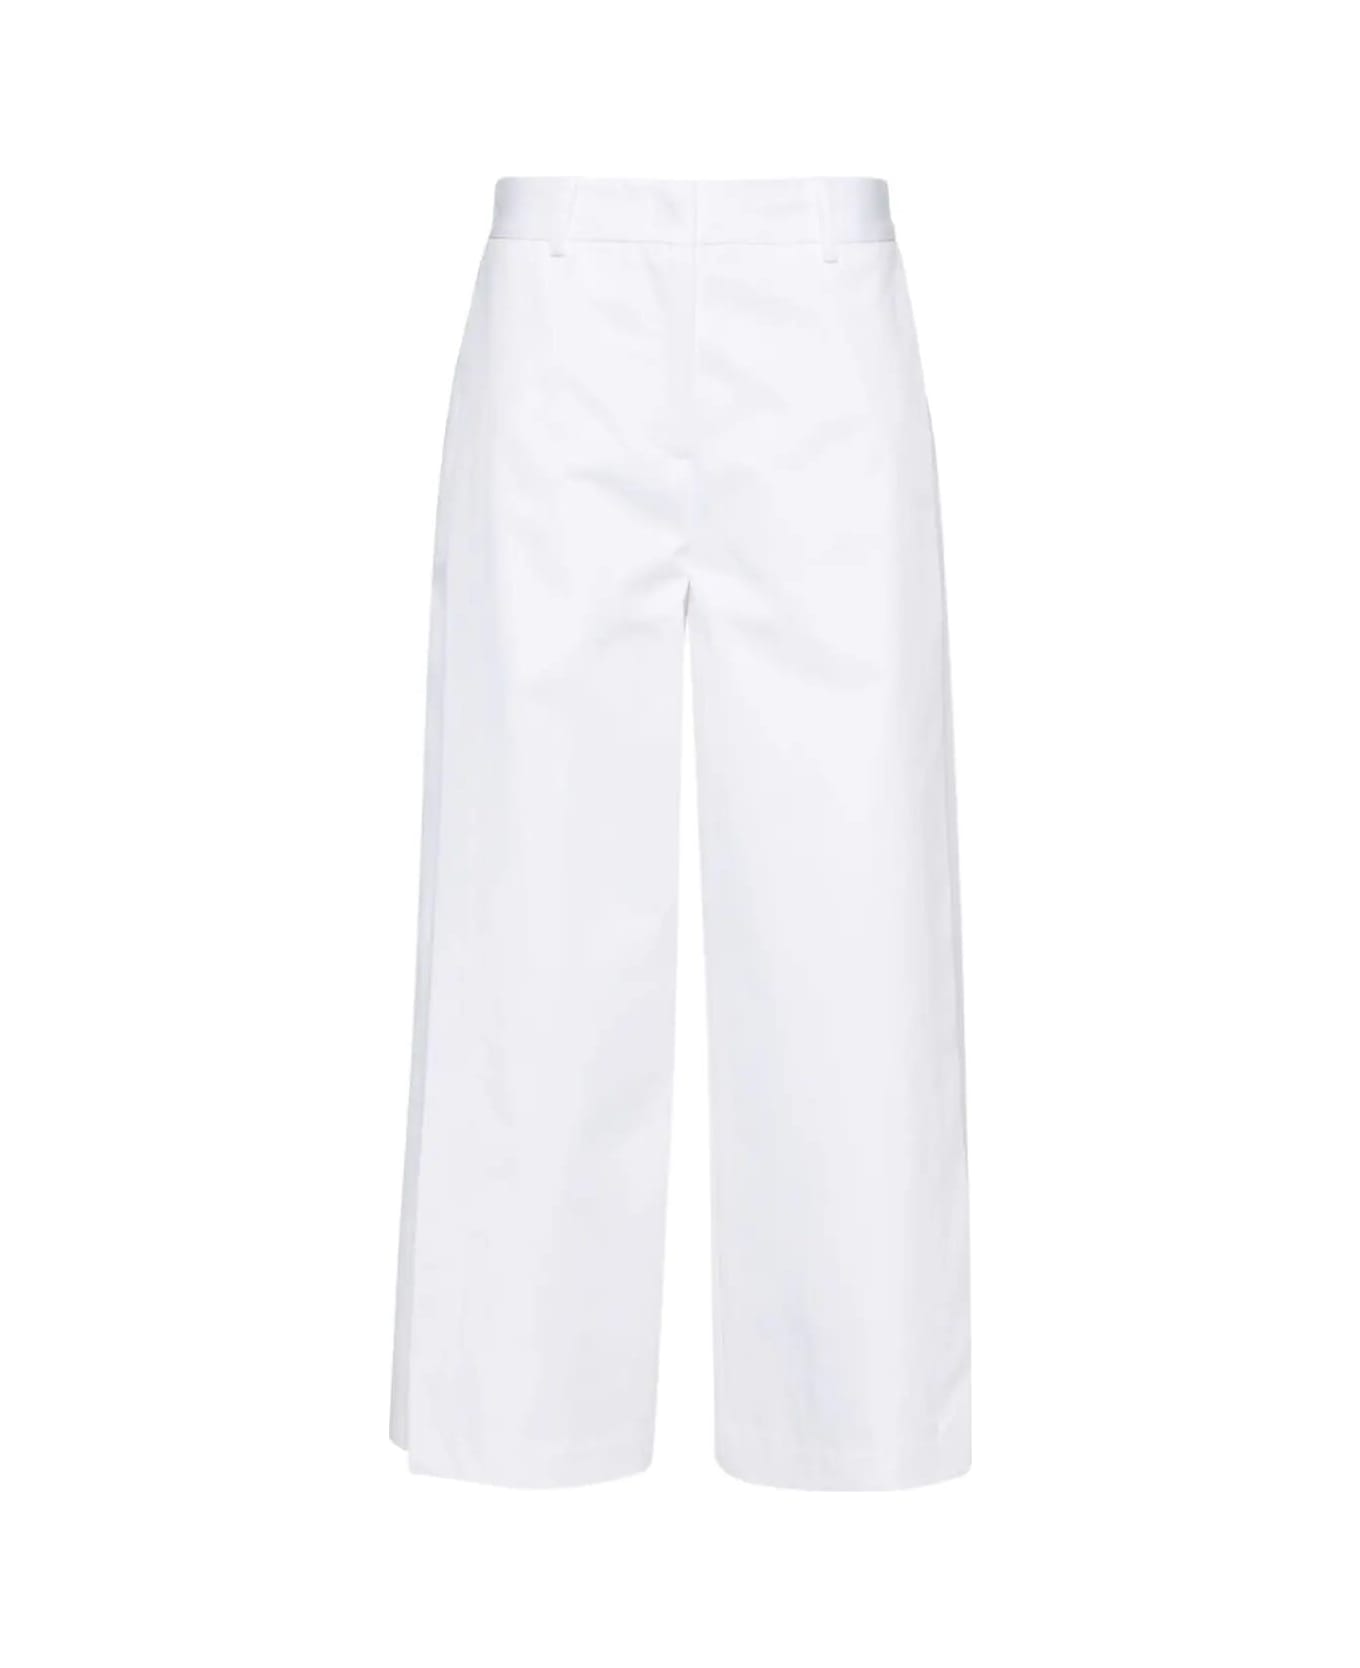 SEMICOUTURE Holly Trouser - White